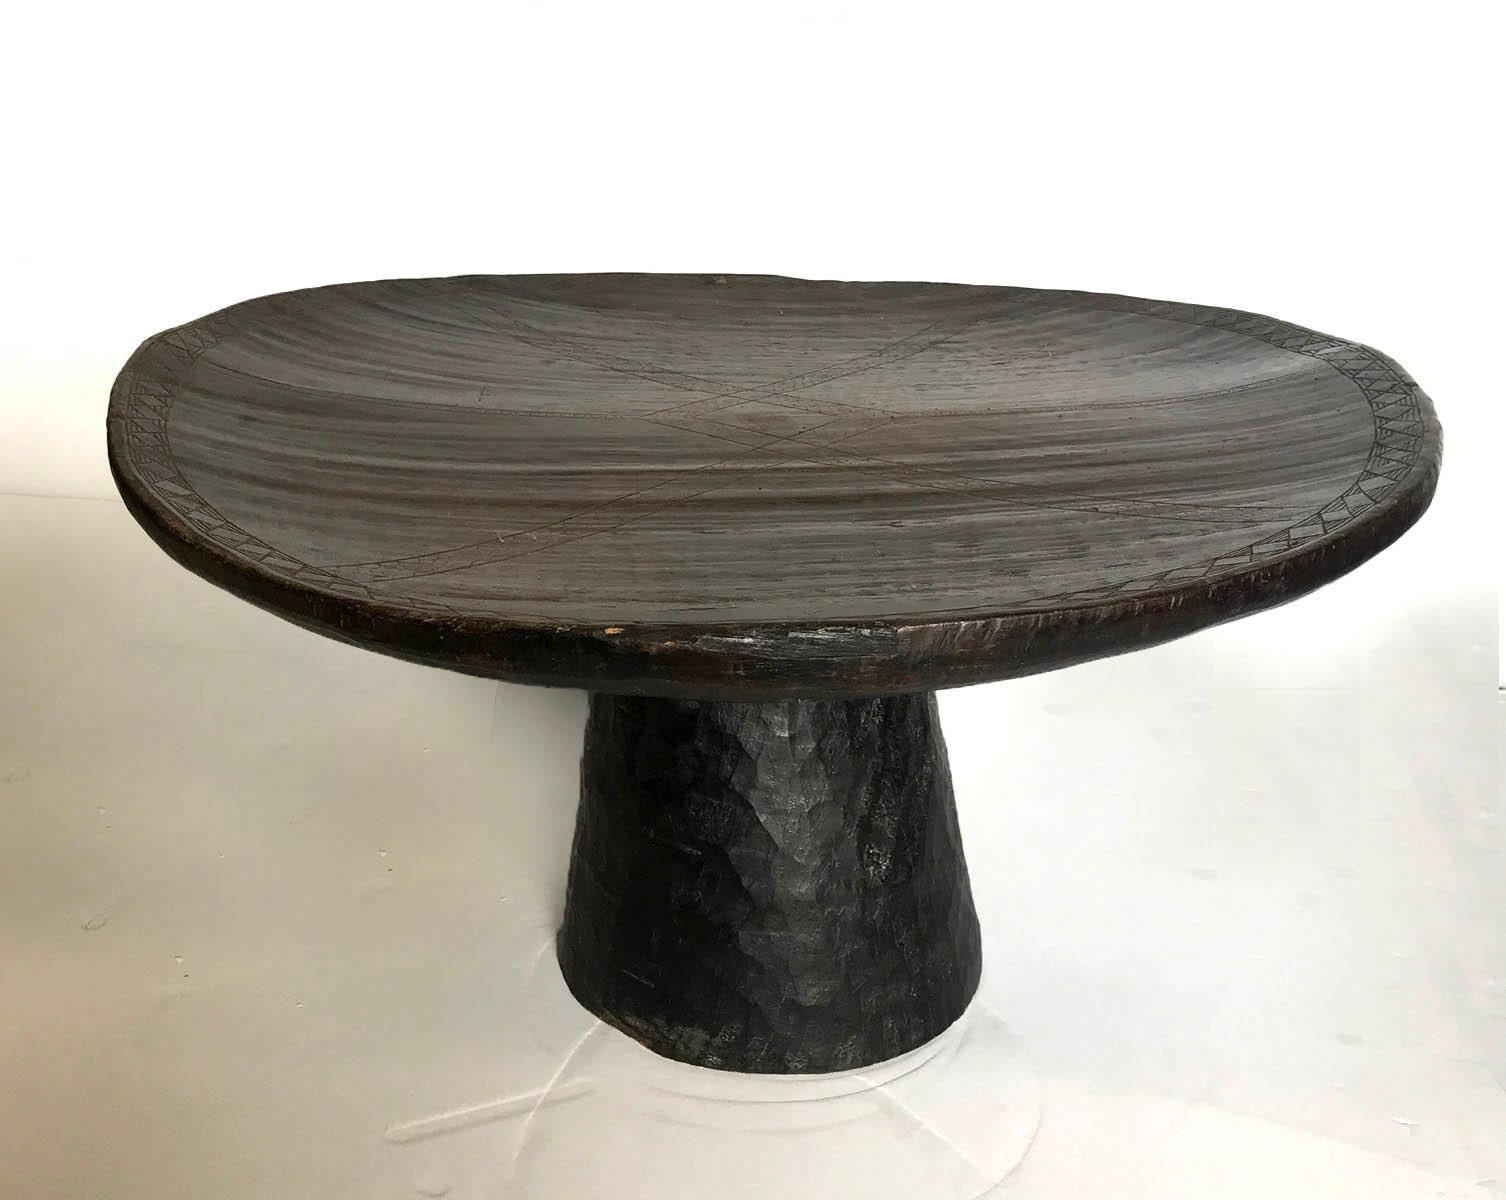 Carved Primitive African Wooden Round Low Table